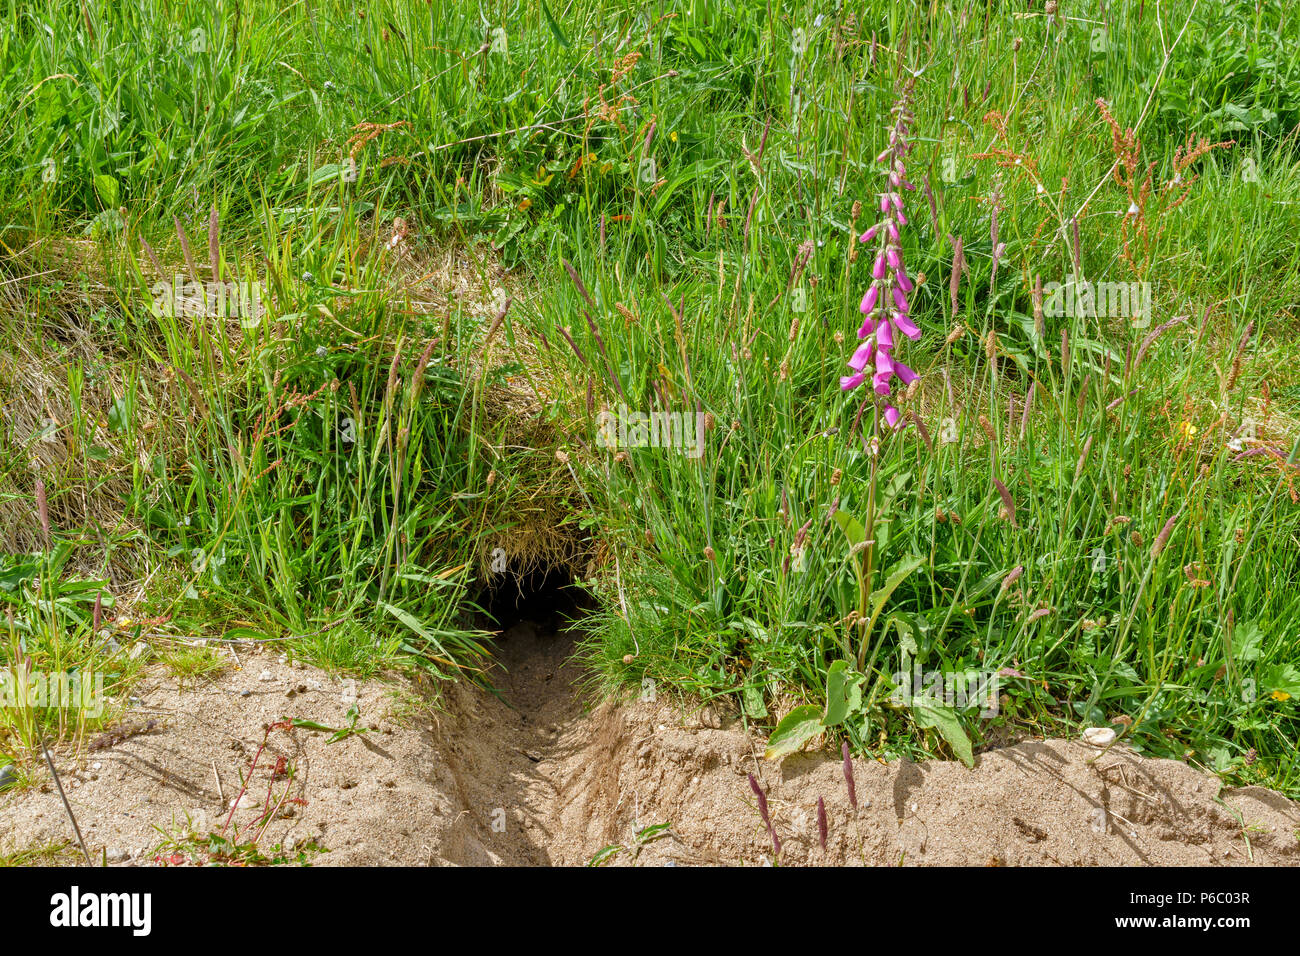 RABBIT BURROW OR ENTRANCE TO WARREN SURROUNDED BY GRASSES IN SPRINGTIME AND A FOXGLOVE FLOWER Stock Photo